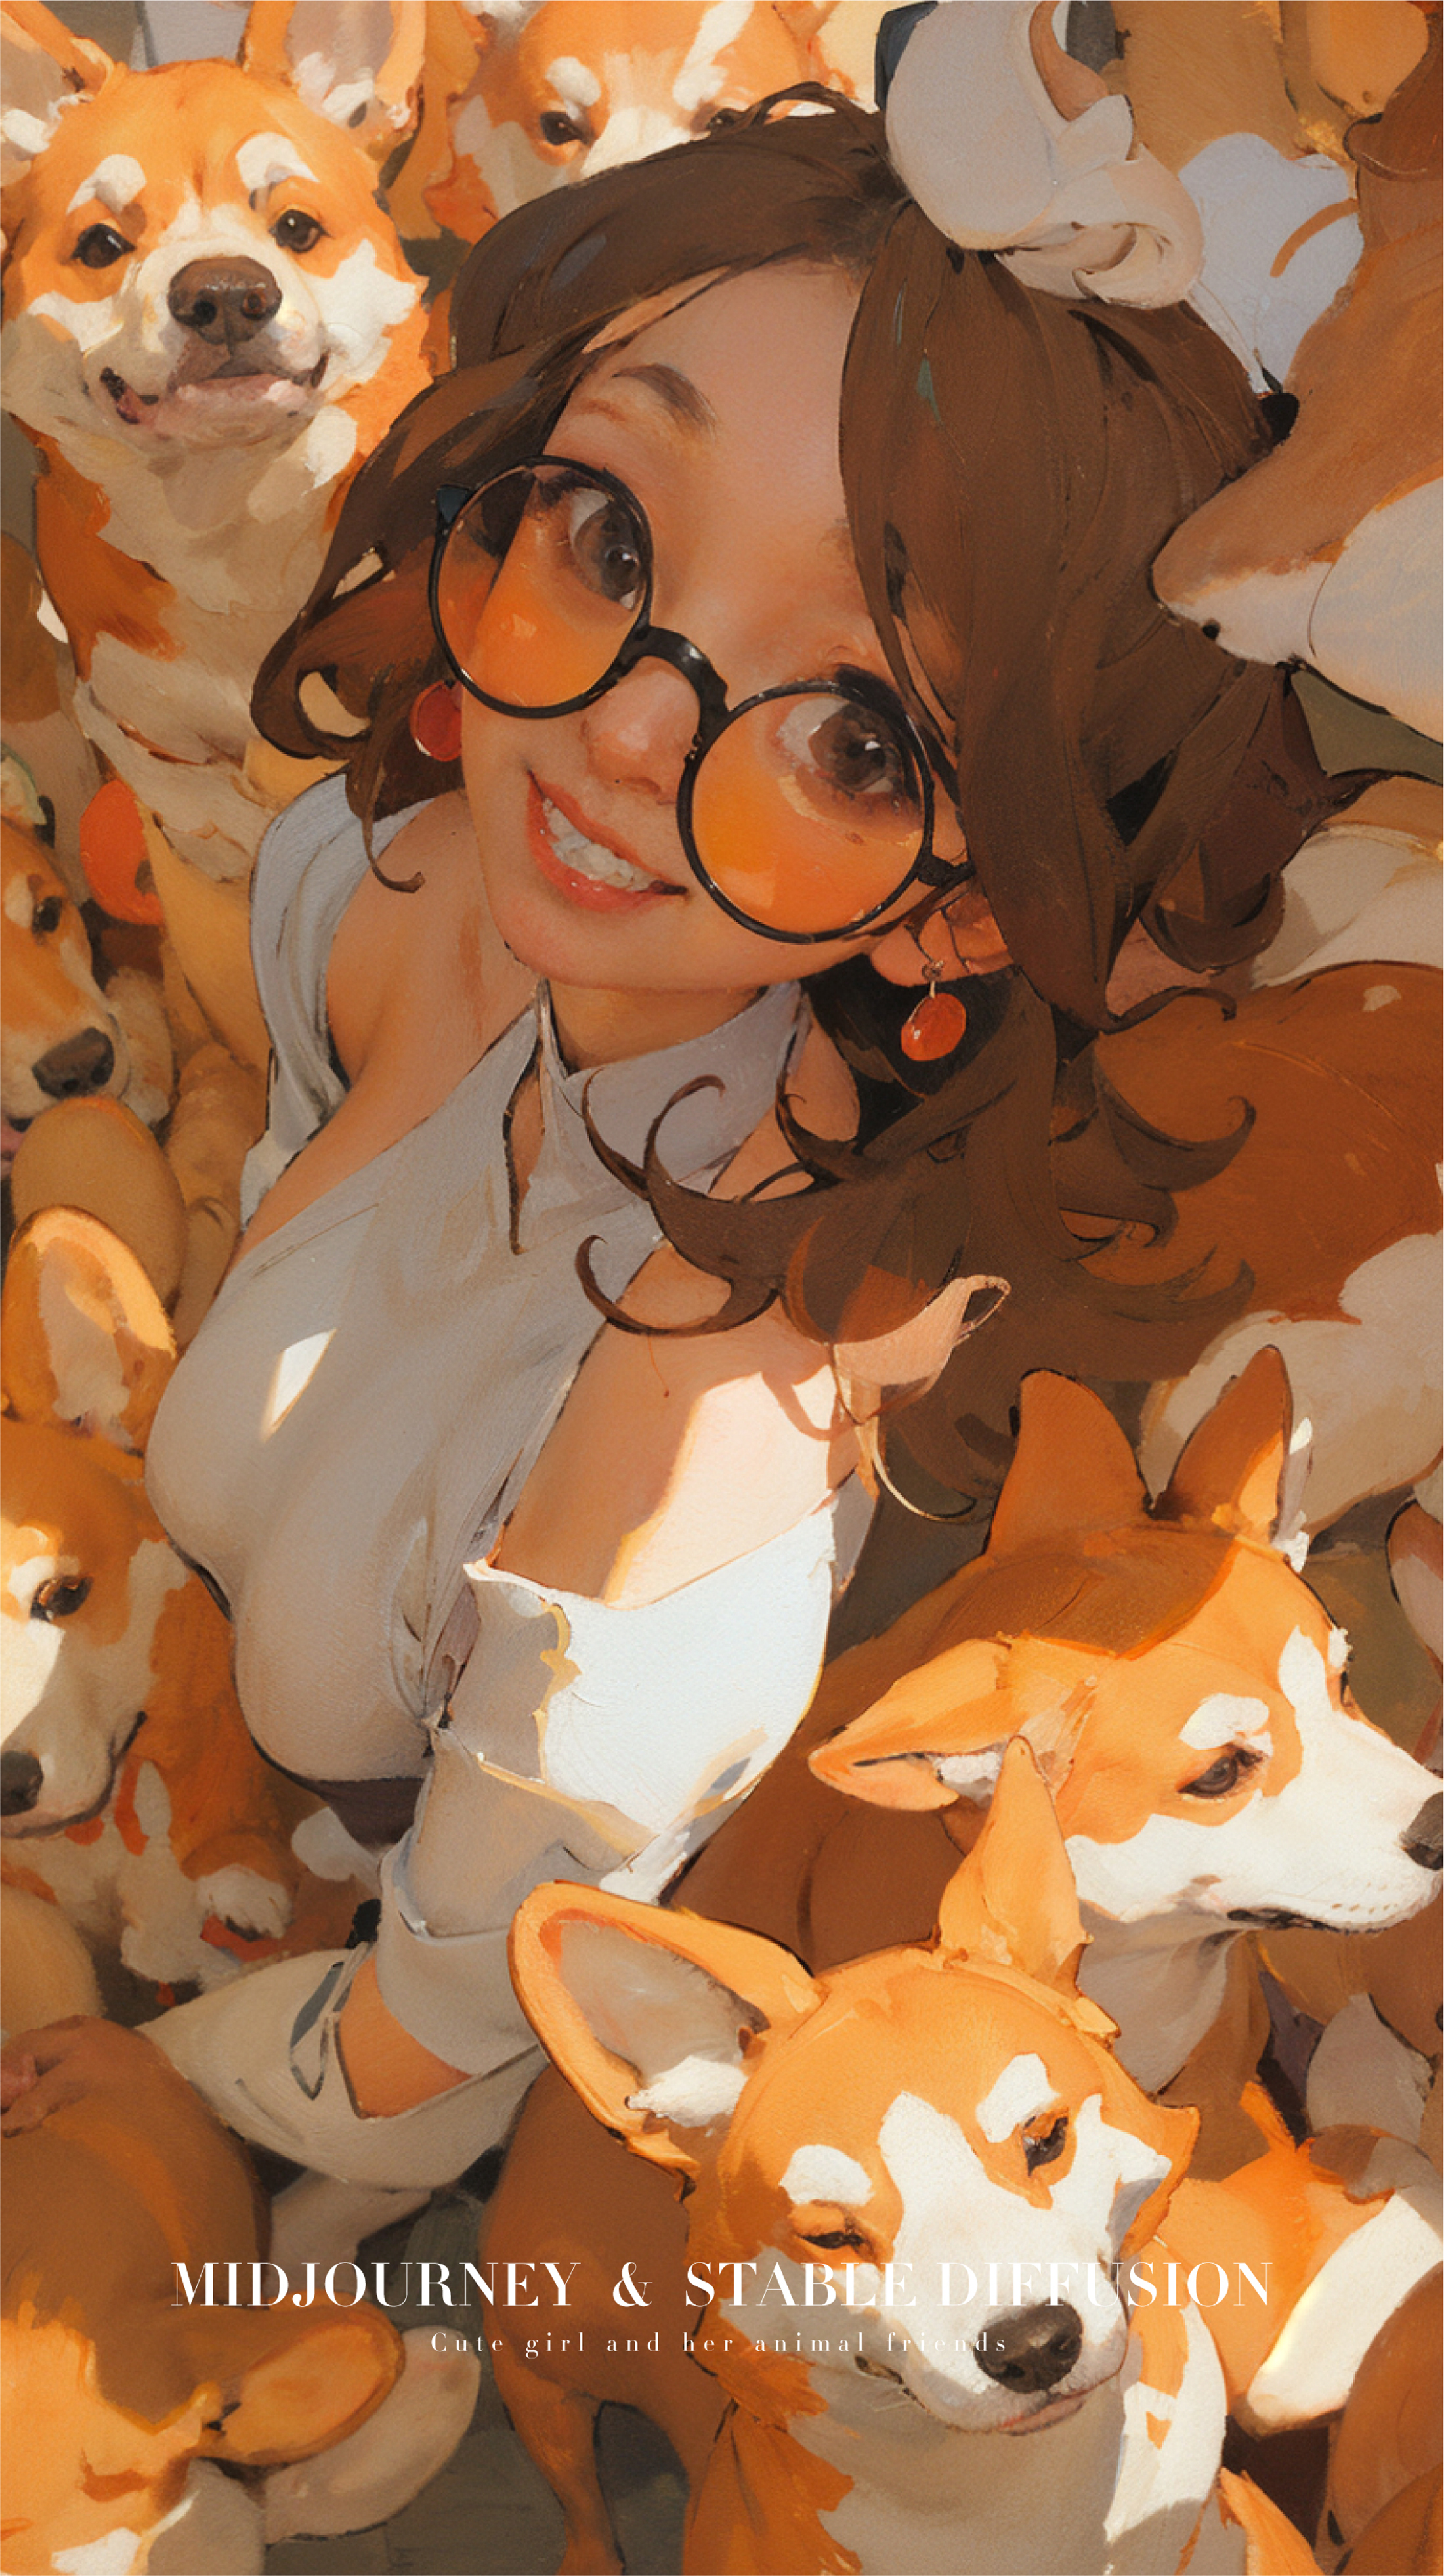 A girl smiling wearing glasses and surrounded by corgis.